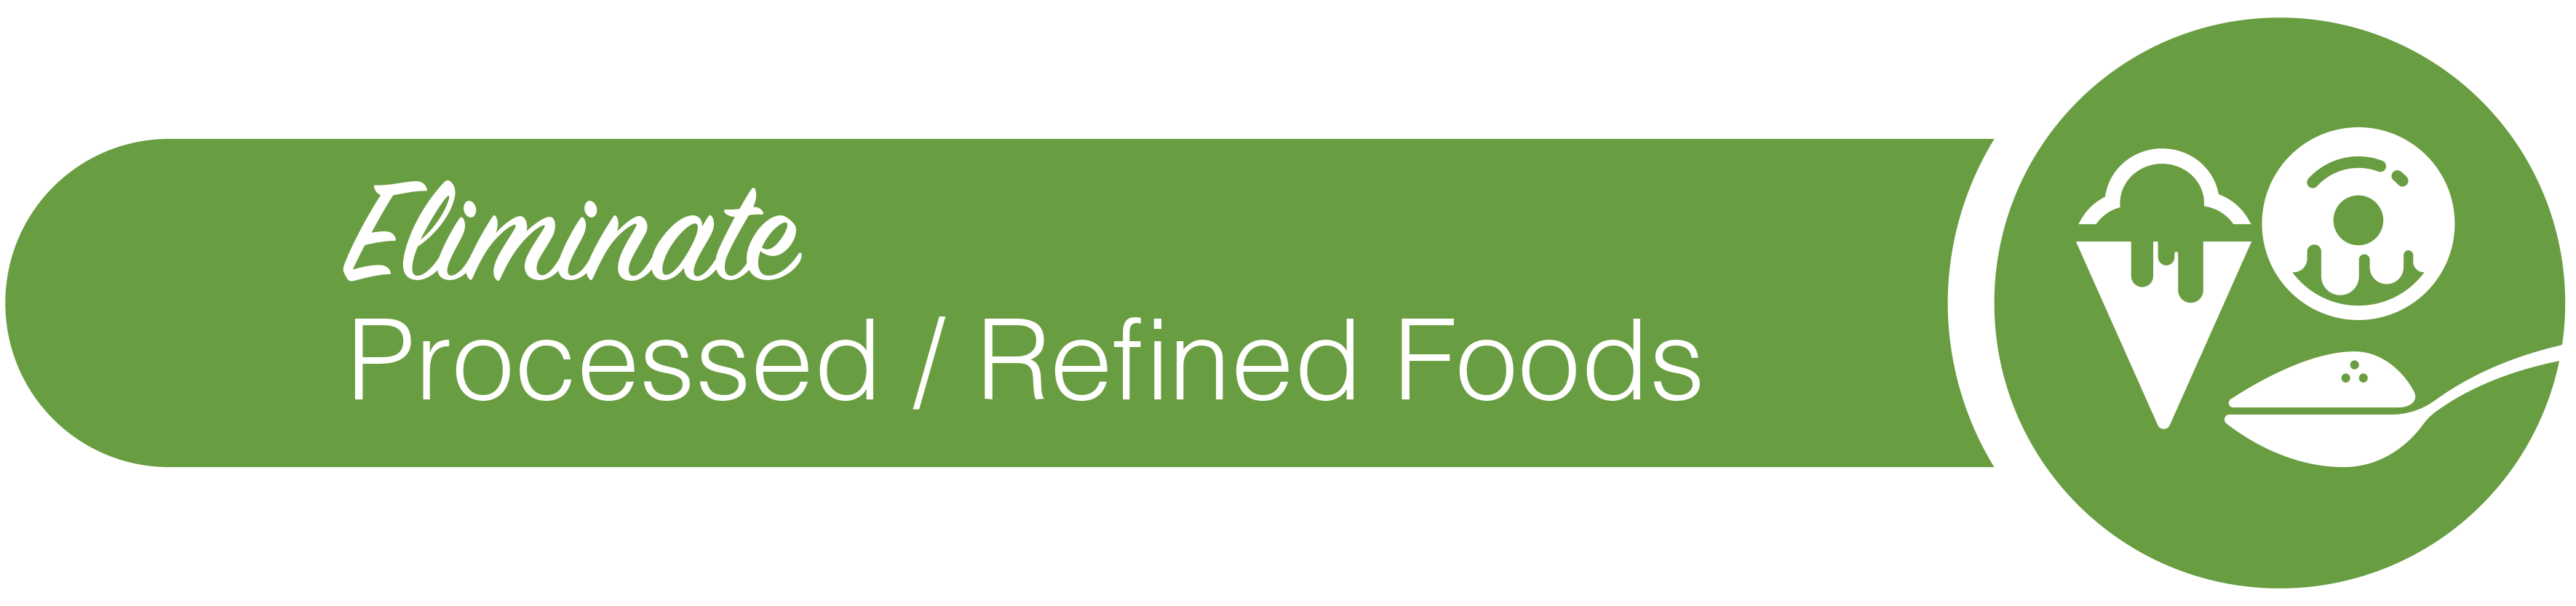 1119-KitchenClean-Up-Blog-Refined-Foods